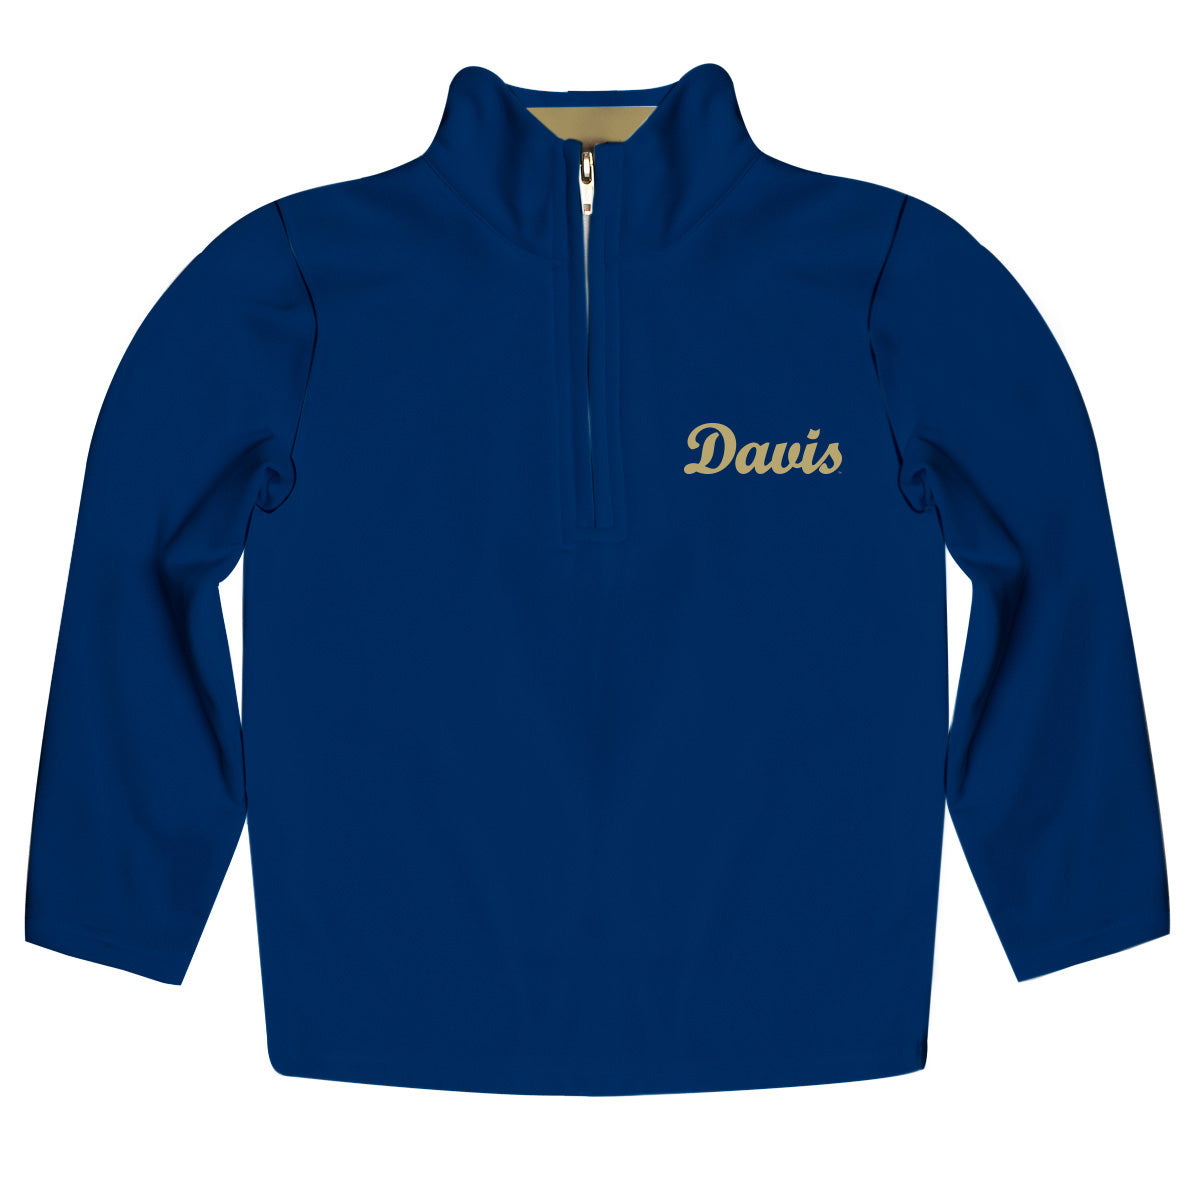 UC Davis Aggies Game Day Solid Gold Quarter Zip Pullover for Infants Toddlers by Vive La Fete